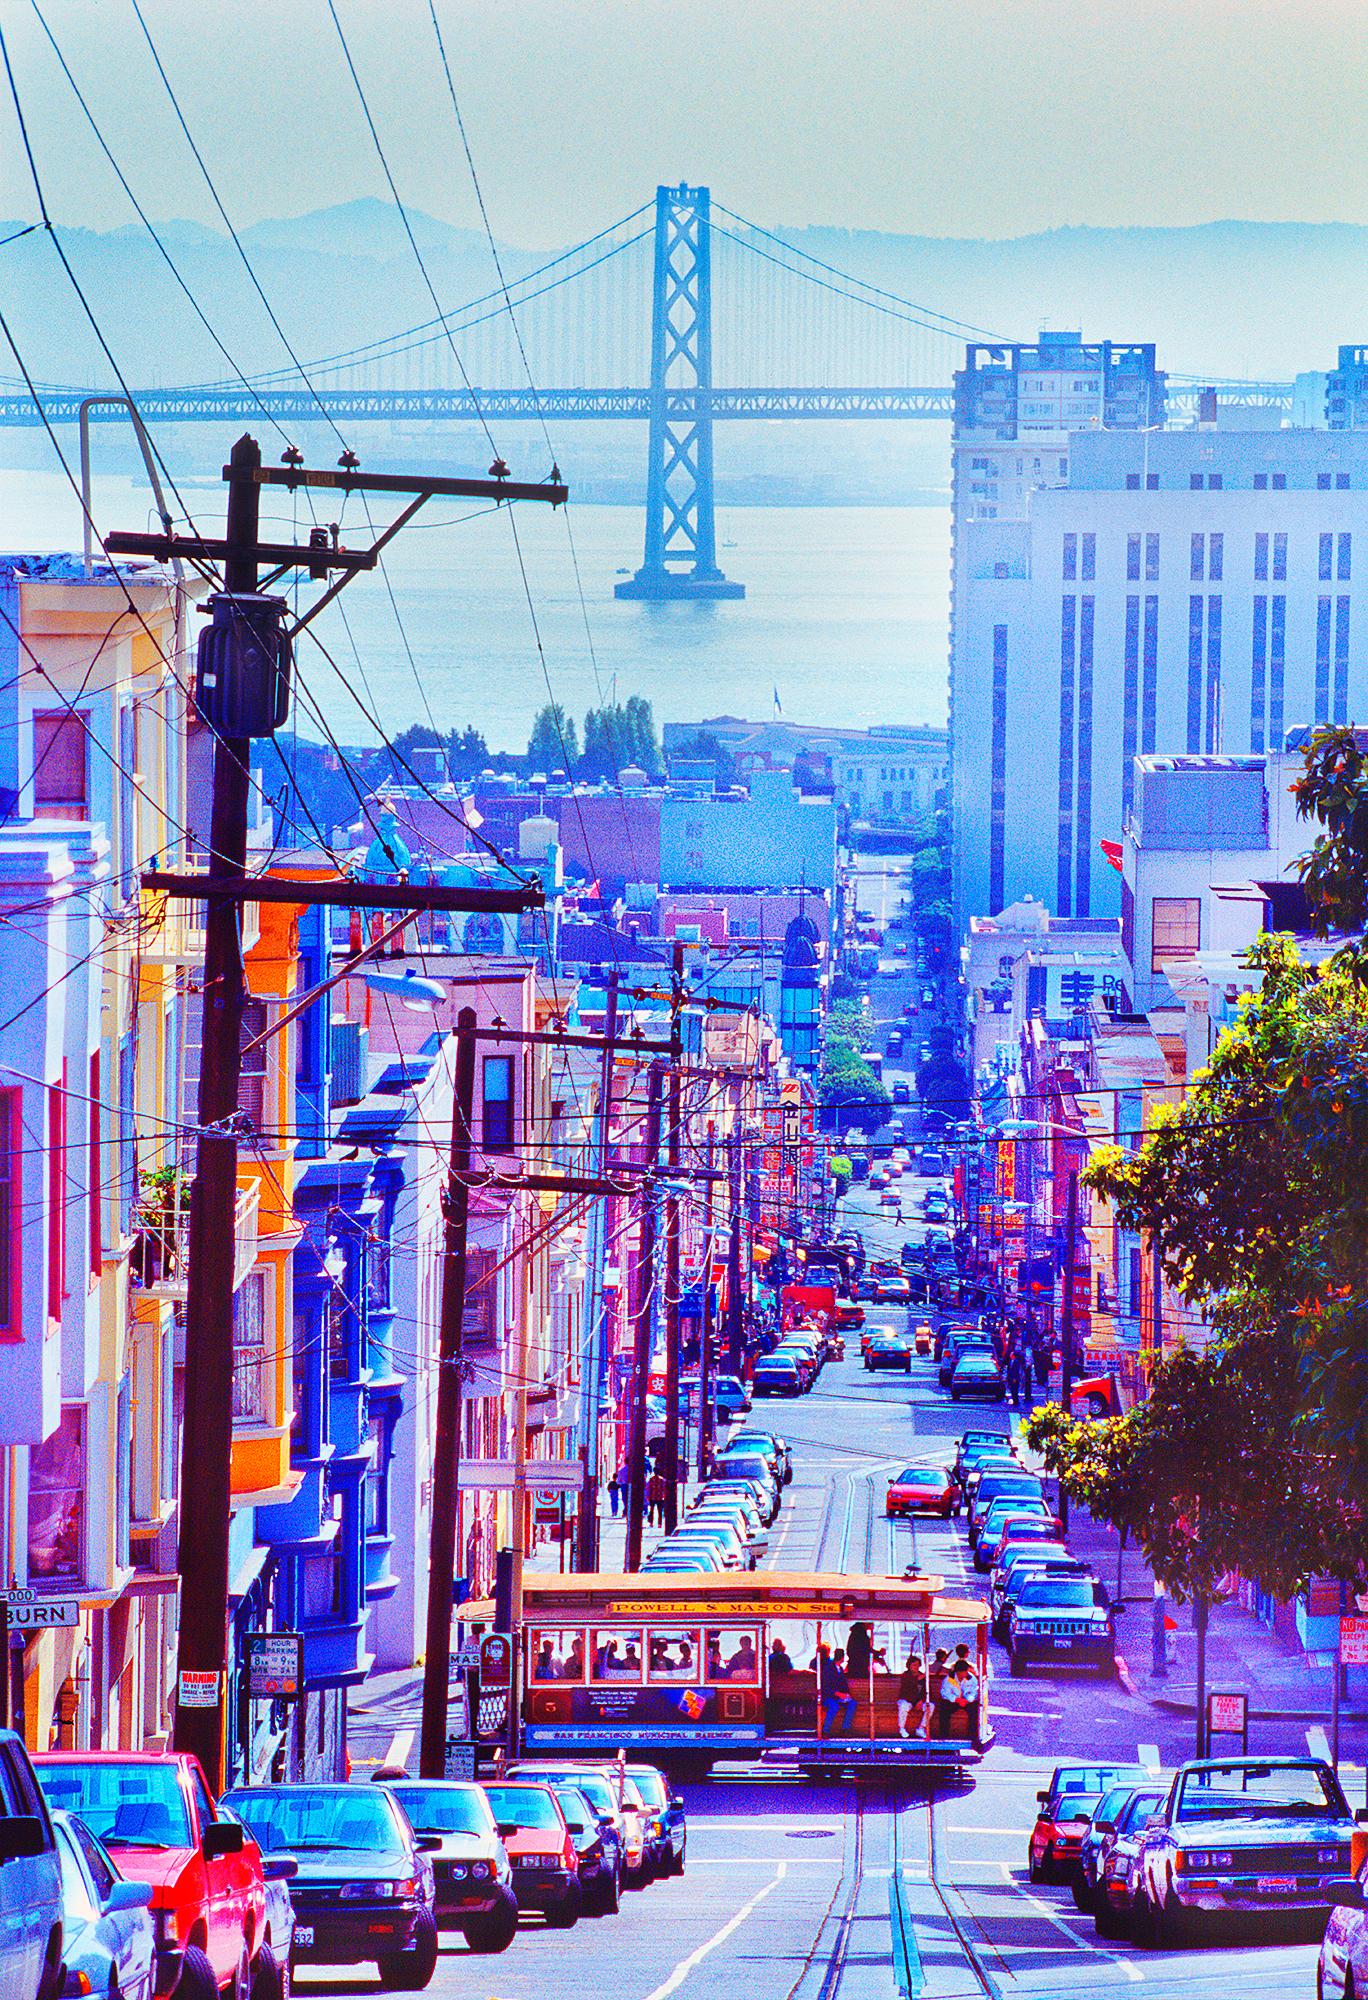 Mitchell Funk Landscape Photograph - Cable Car Passing Through Russian Hill Neighborhood, San Francisco